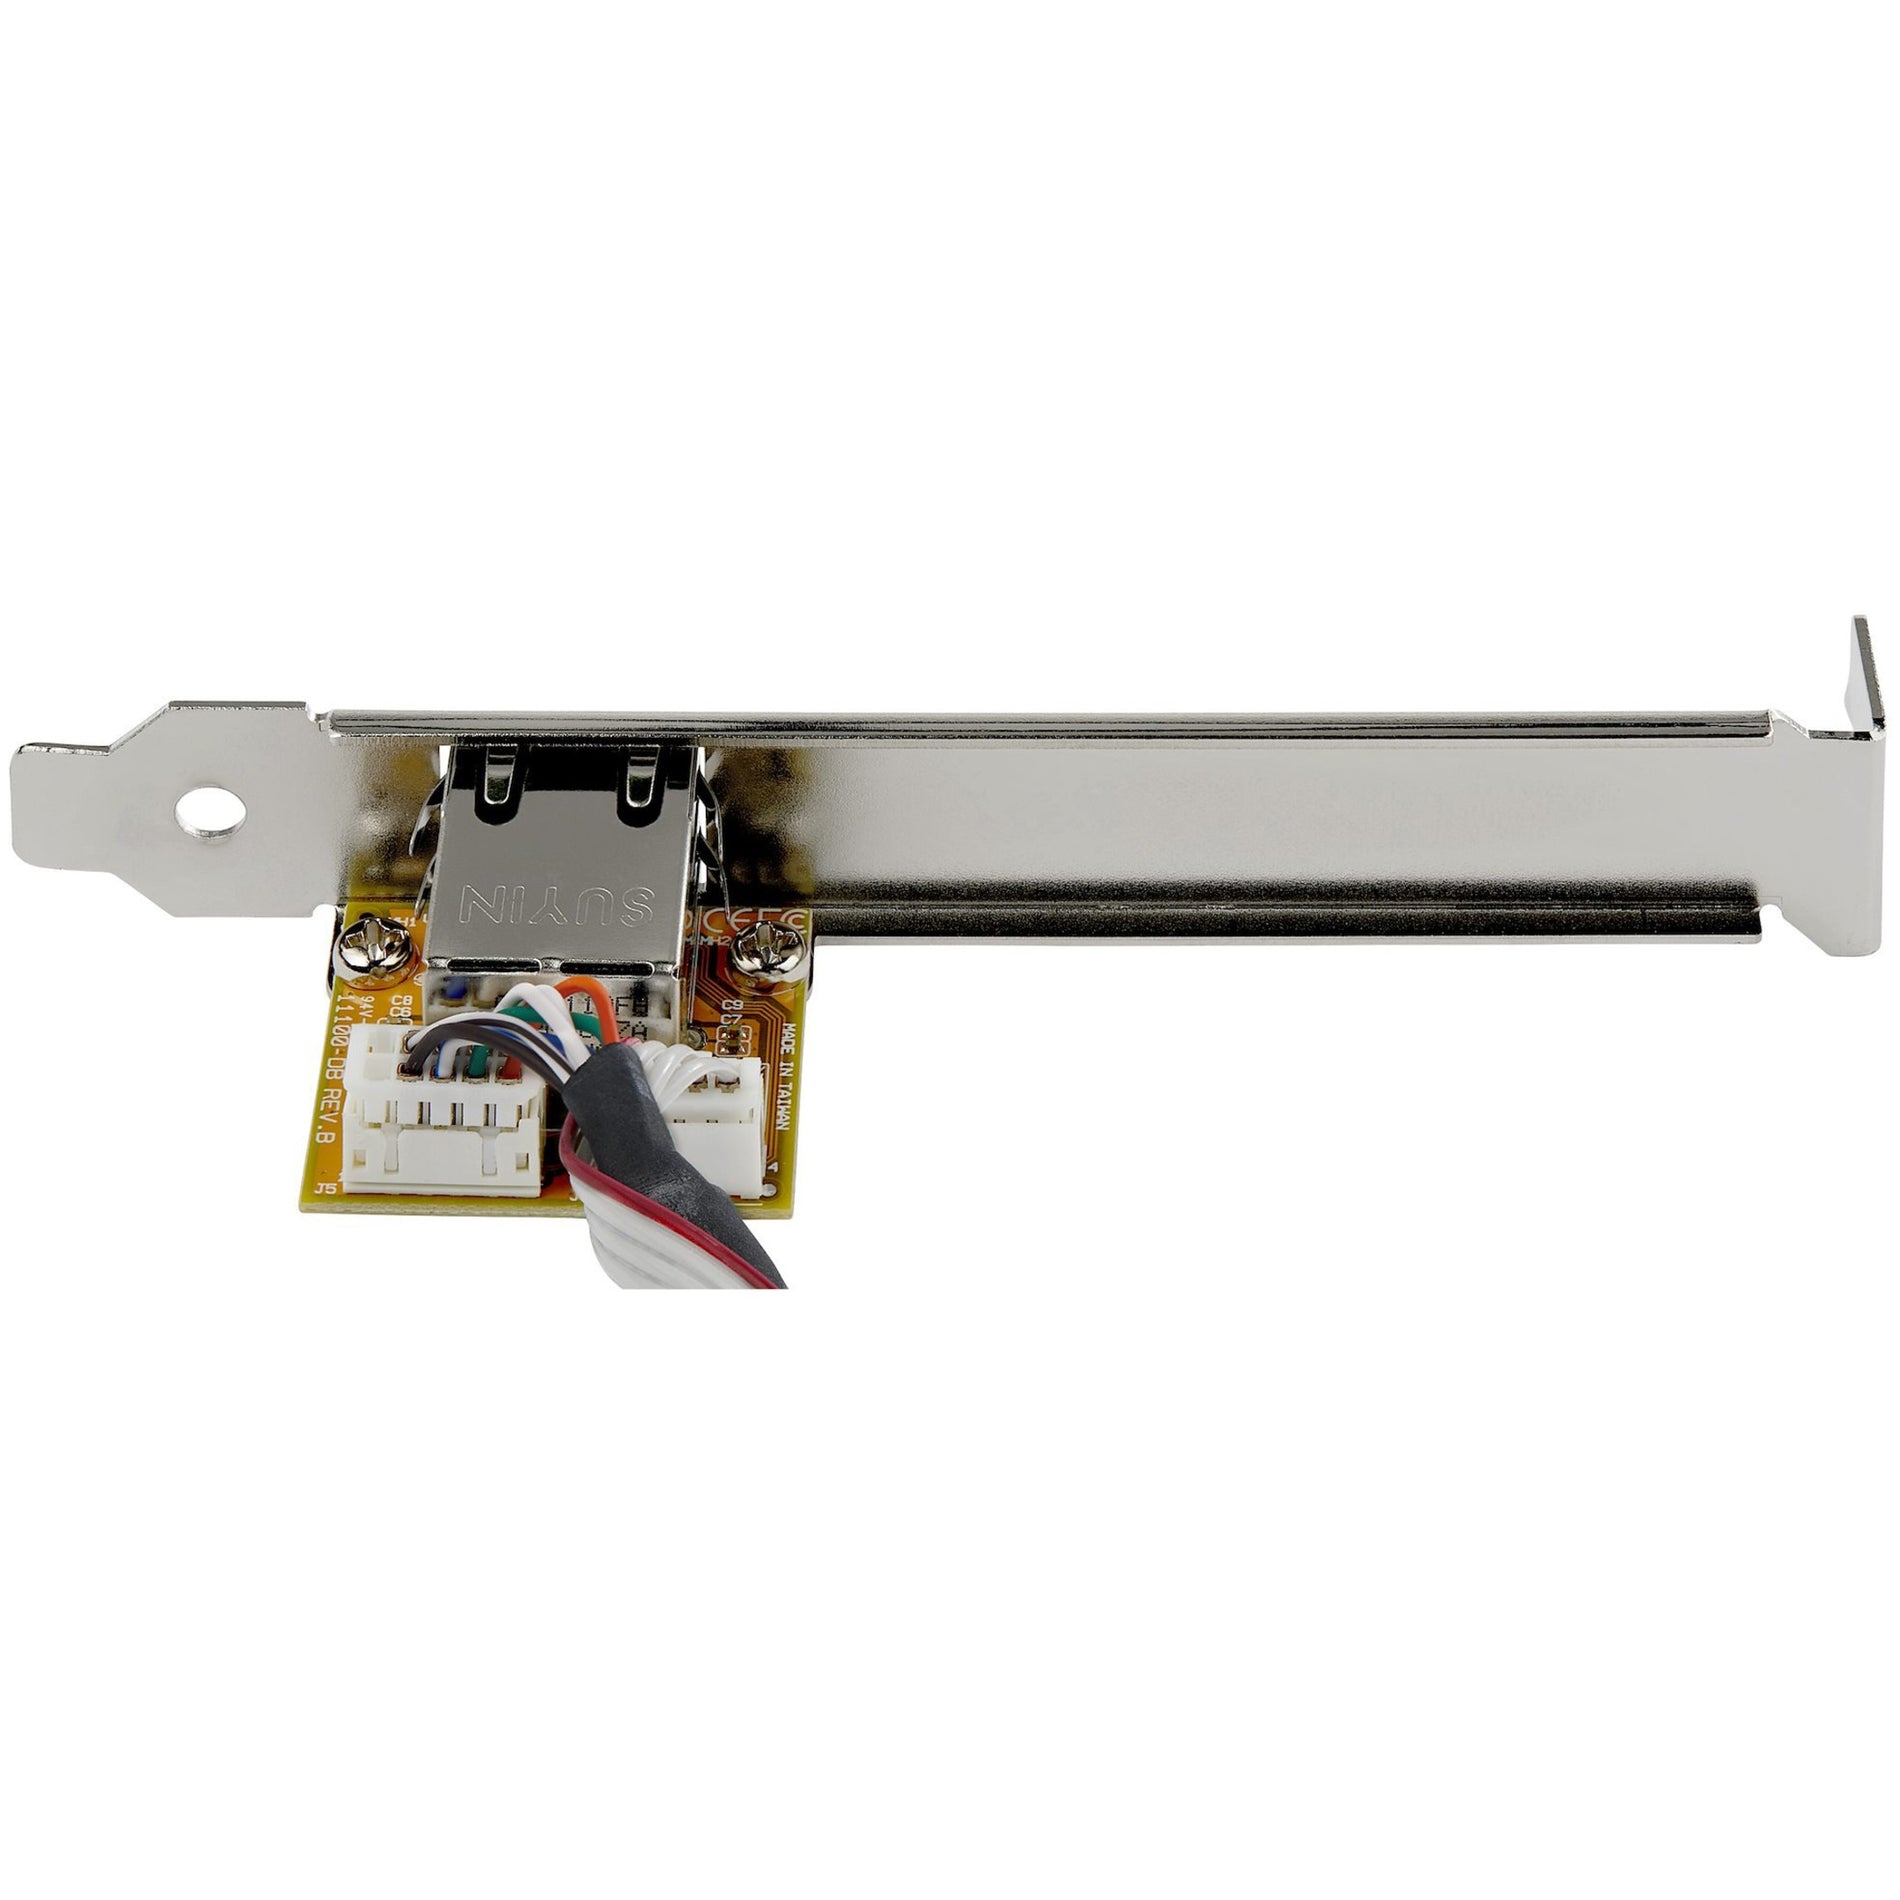 StarTech.com ST1000SMPEX Mini PCI Express Gigabit Ethernet Network Adapter NIC Card, High-Speed Internet Connection for Mini-ITX and Embedded Systems